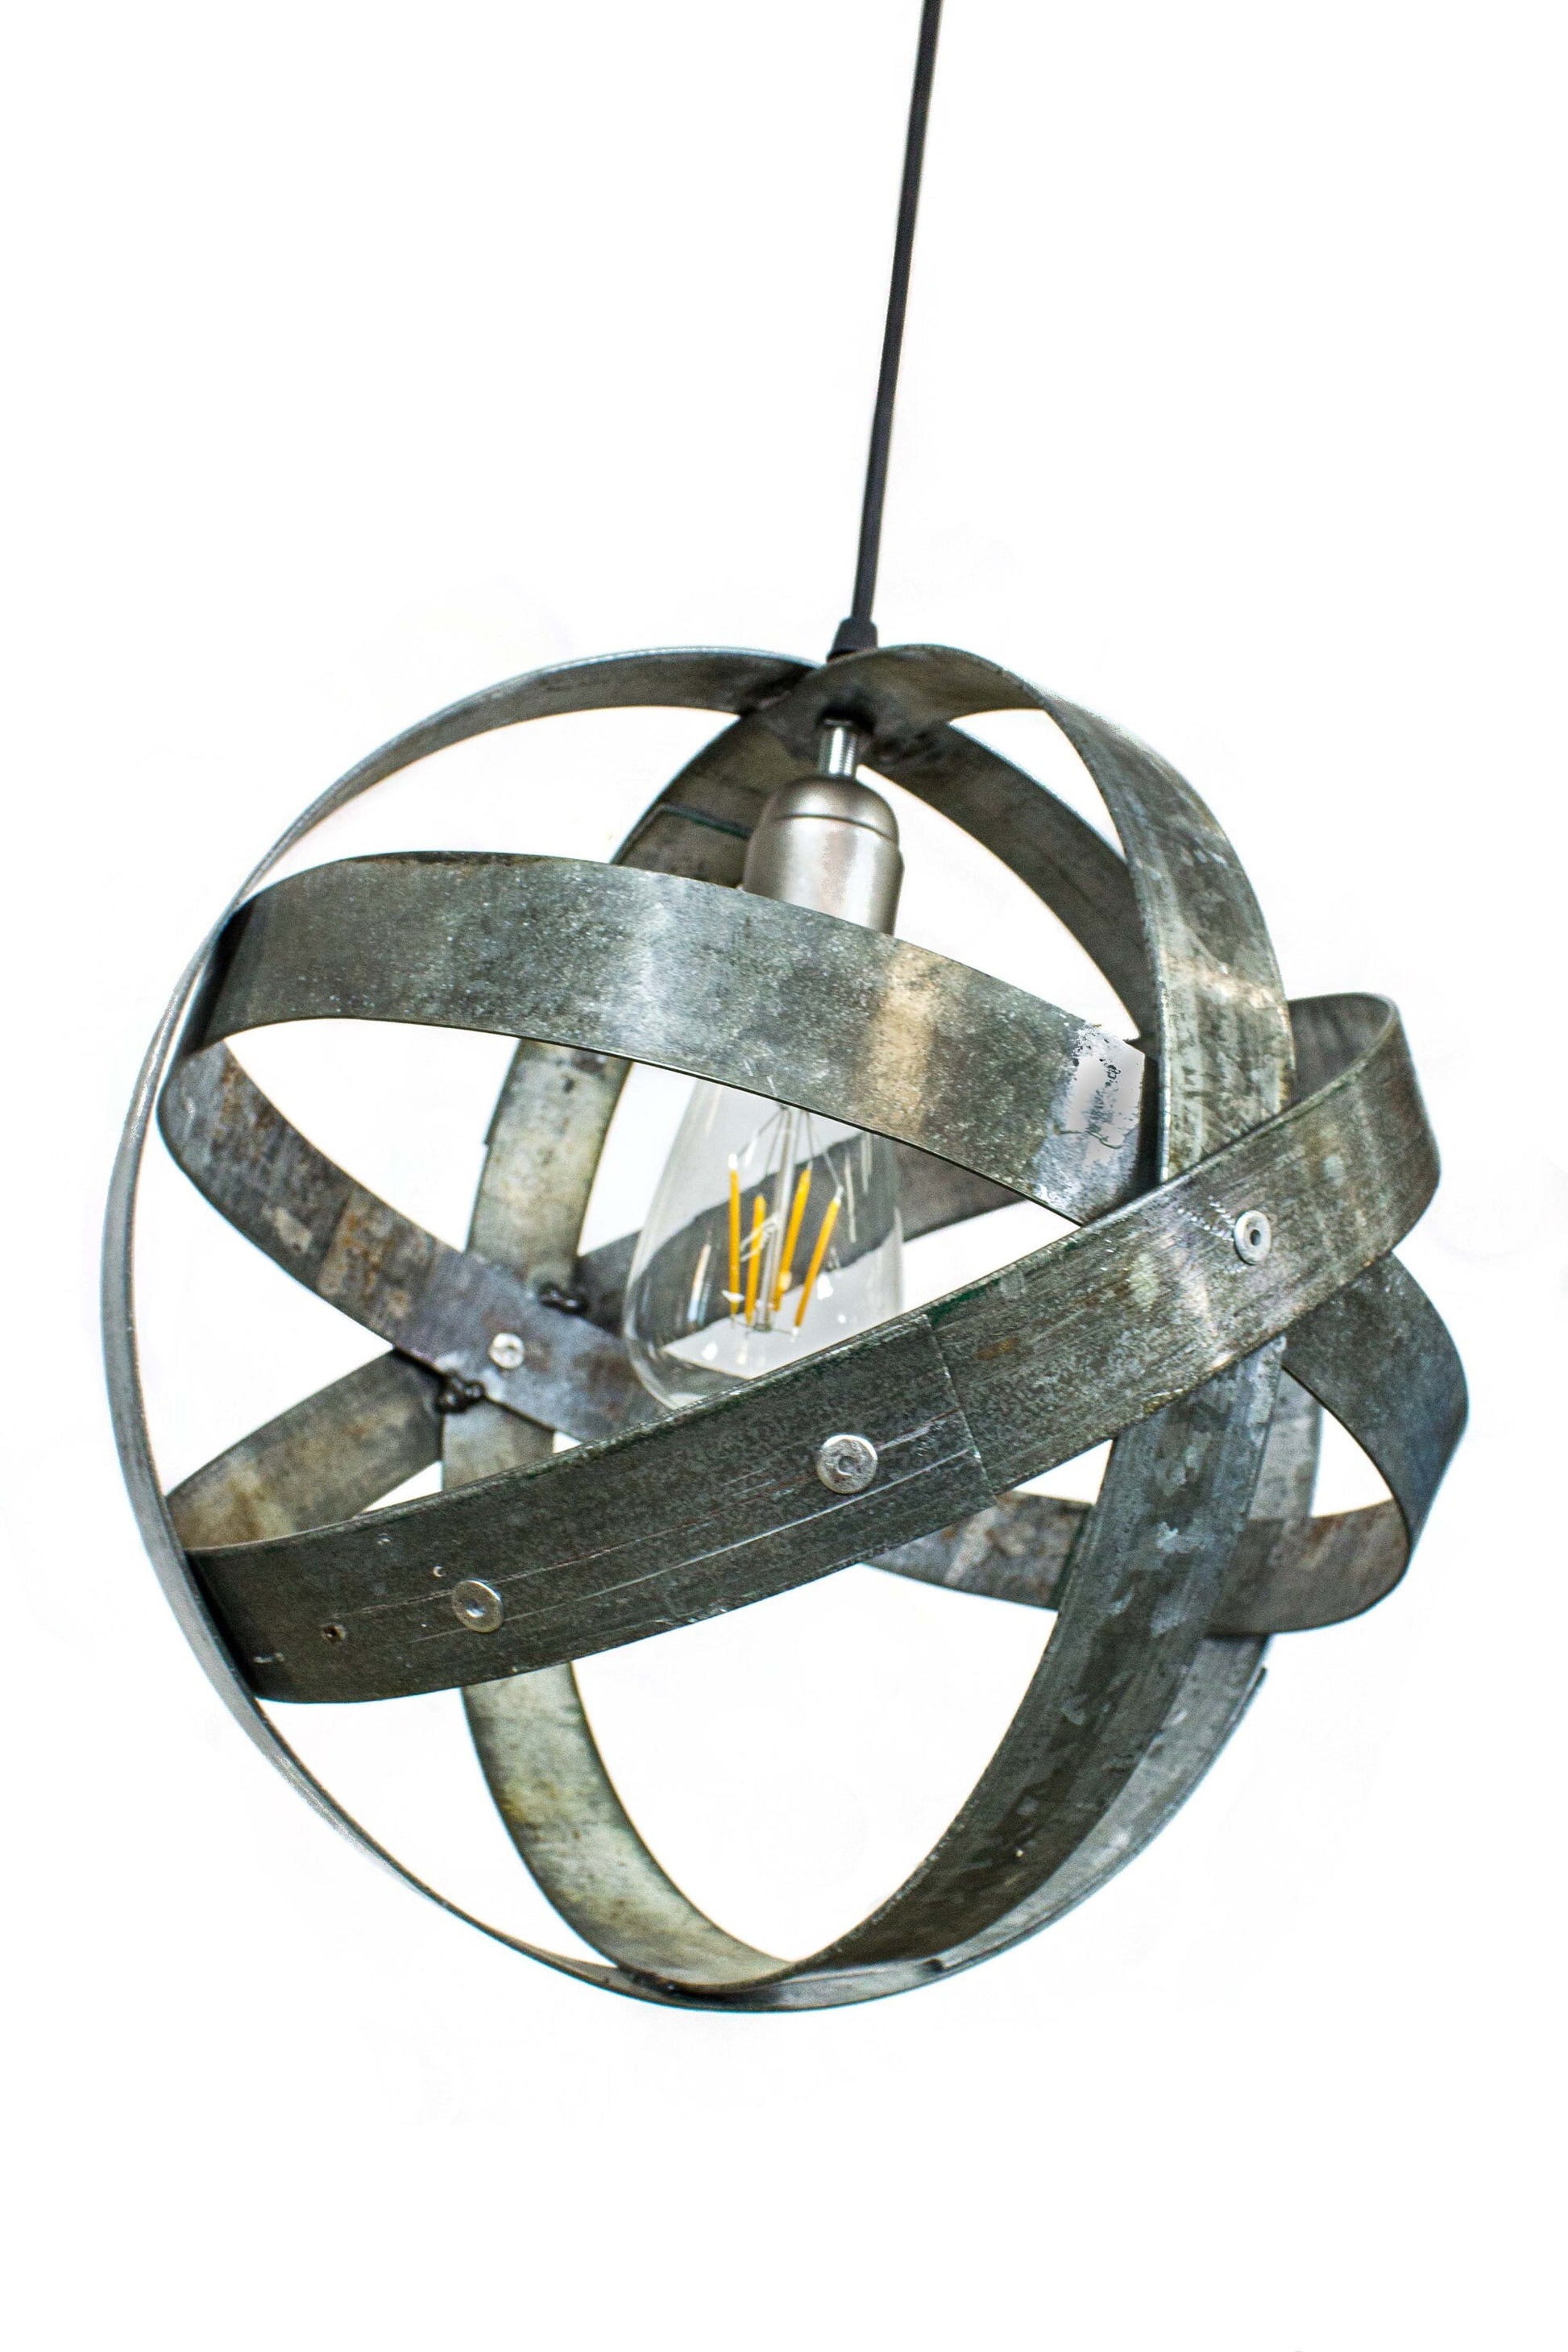 Wine Barrel Ring Pendant Light - Atom - Made from salvaged California wine barrel rings. 100% Recycled!